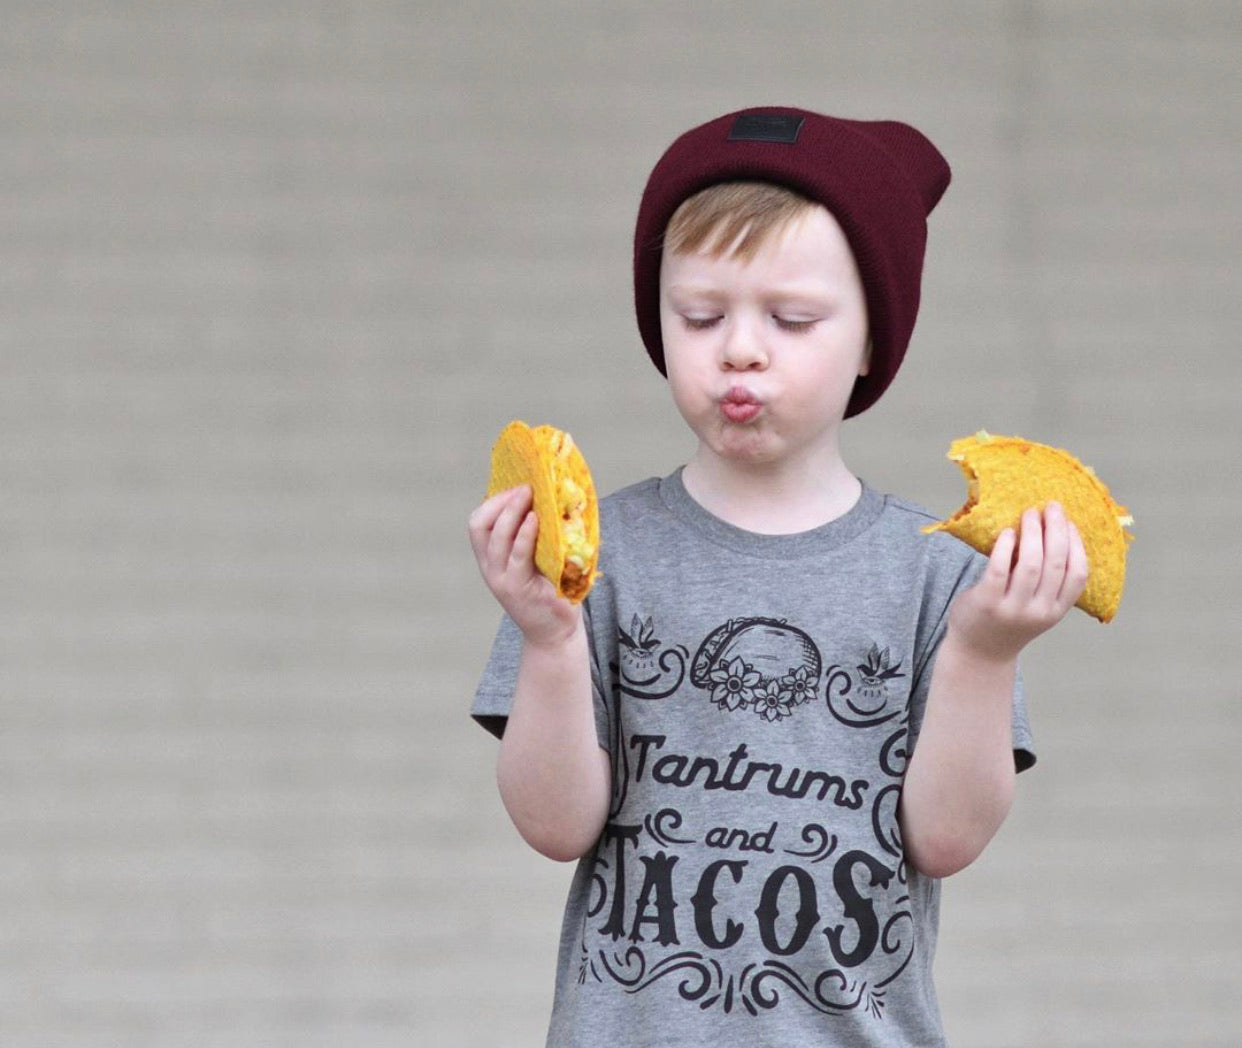 « TANTRUMS AND TACOS » CREAM KID'S TEE